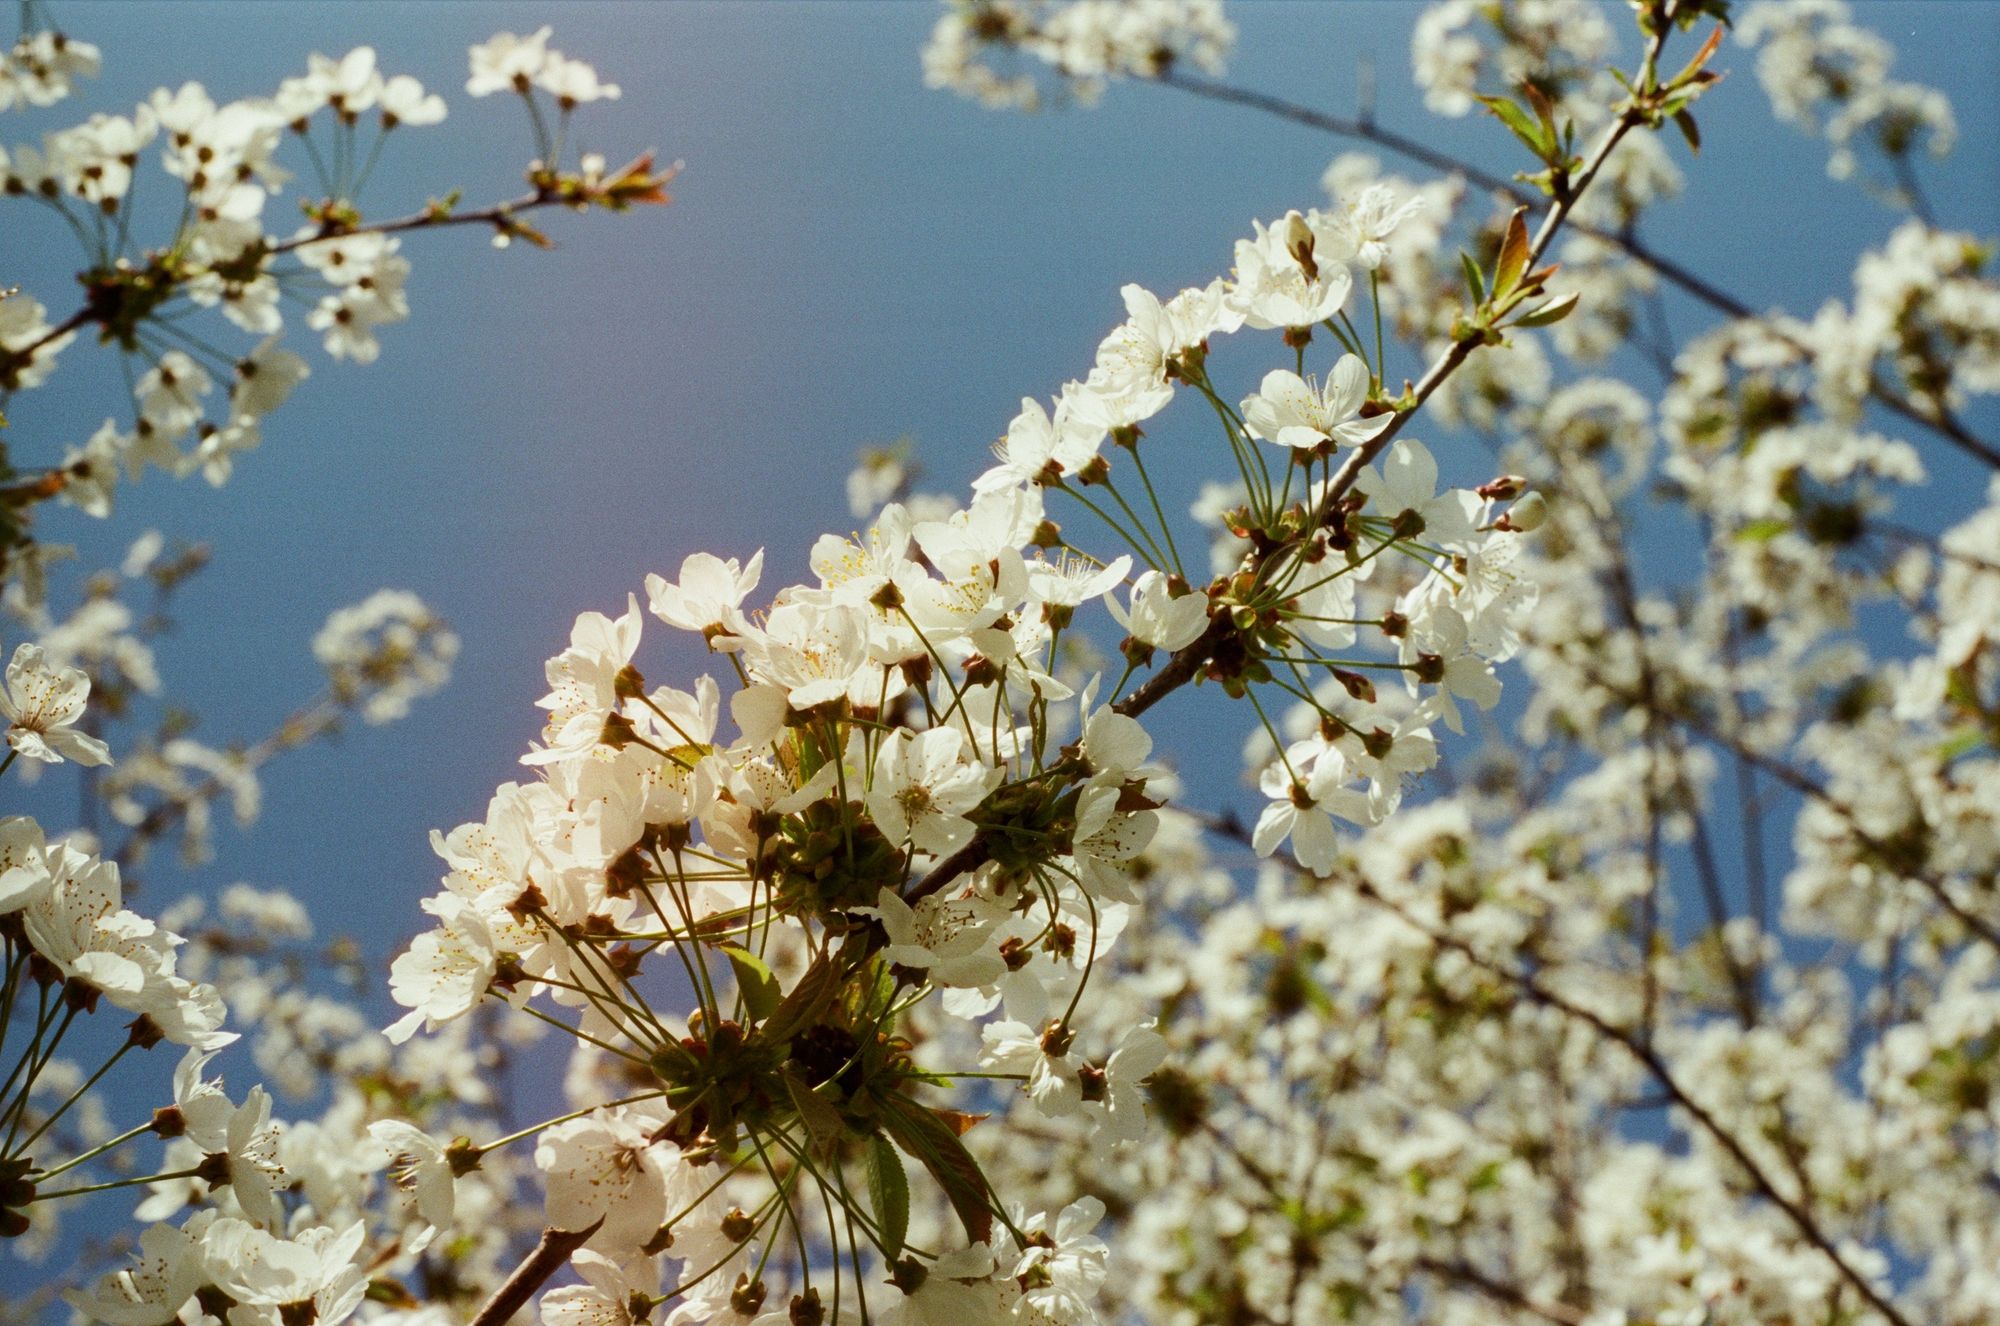 Bright white blossom flowers with a faint pink light leak vertically down the image.